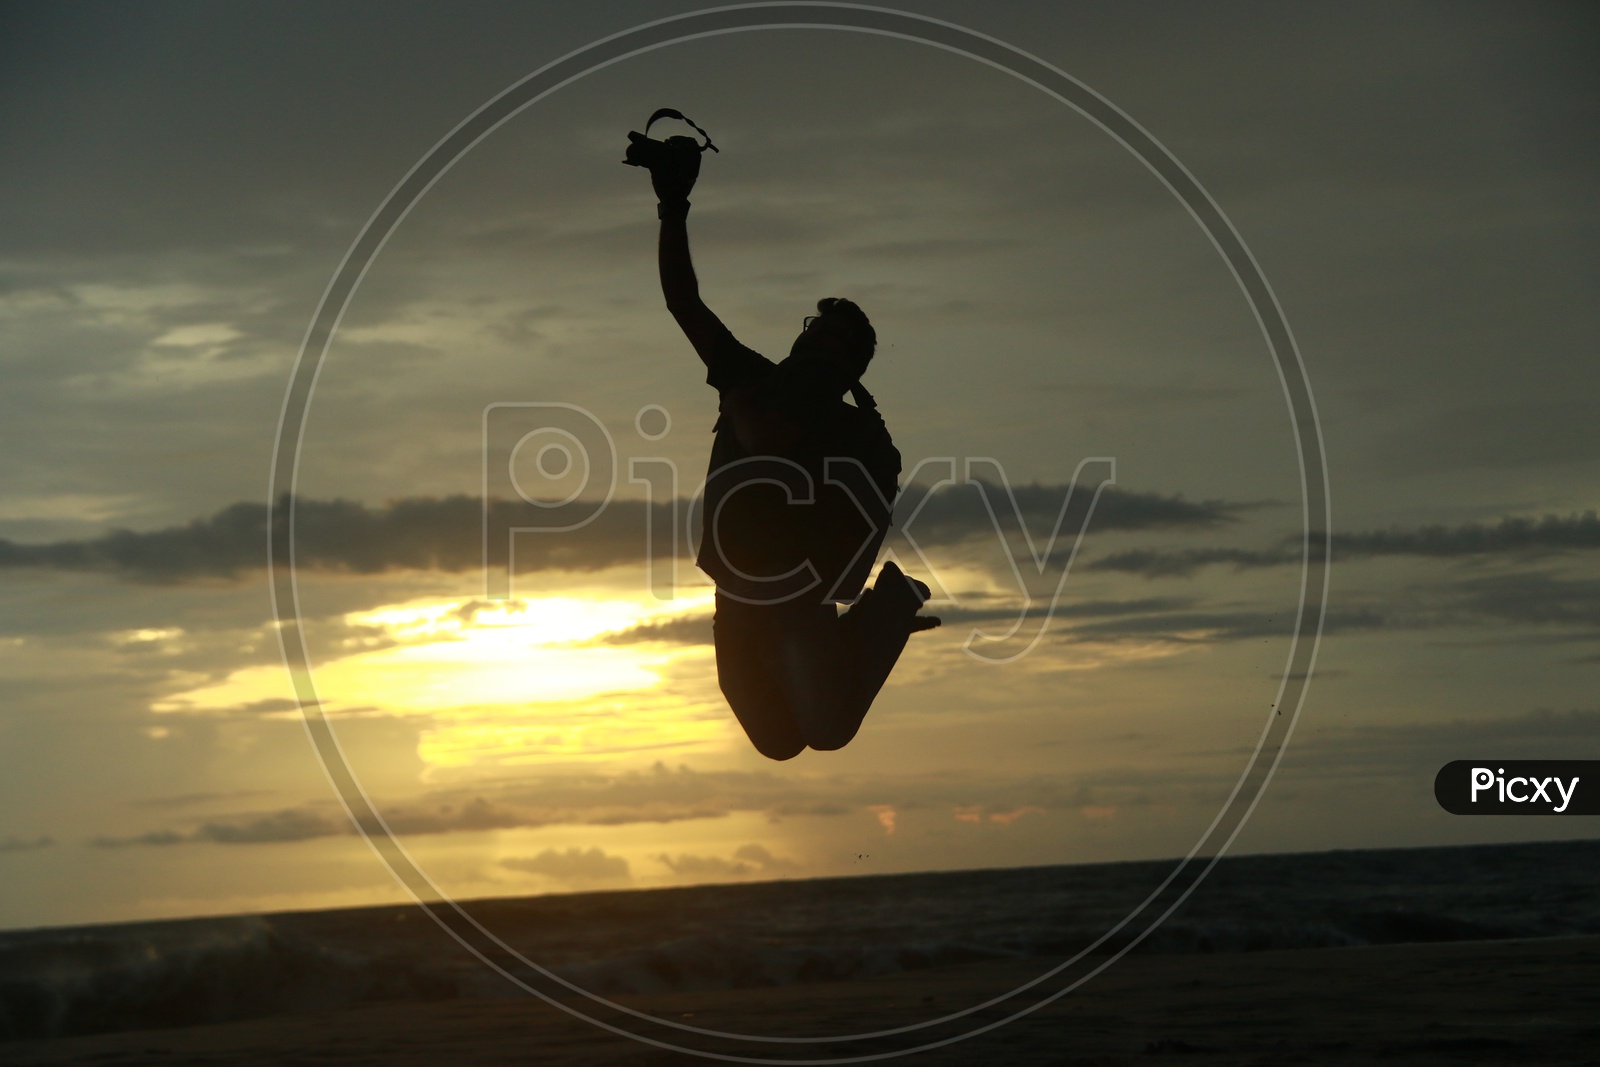 Silhouette Of a Photographer Jumping in Joy At a Beach Over Sunset Sky In Background